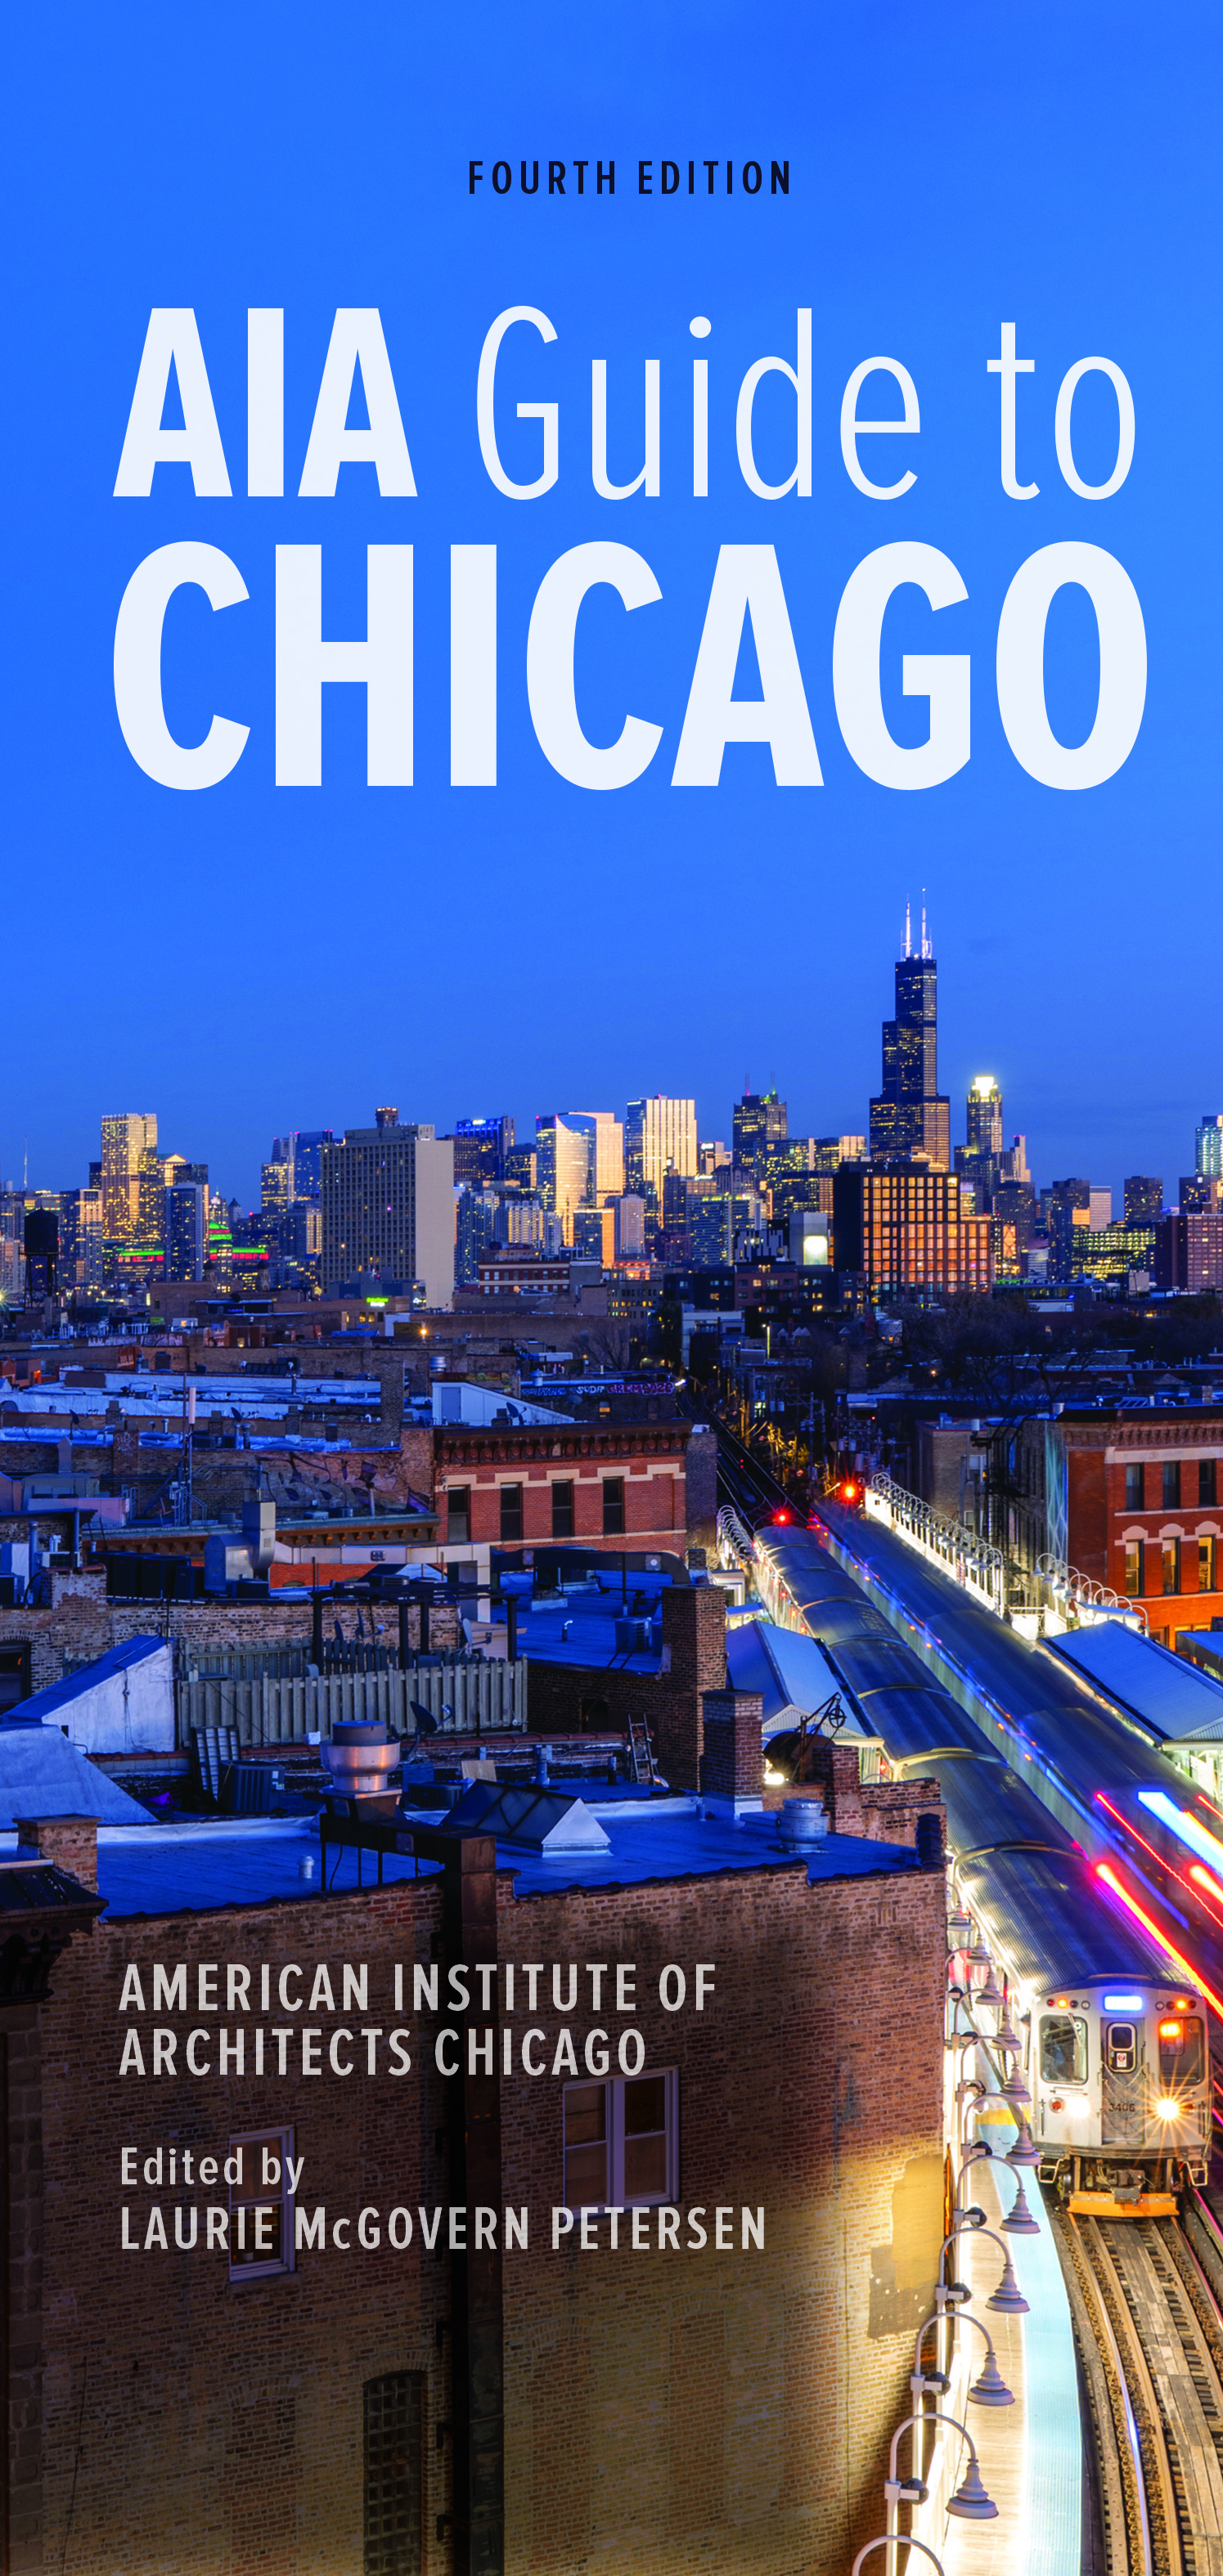 AIA Guide to Chicago